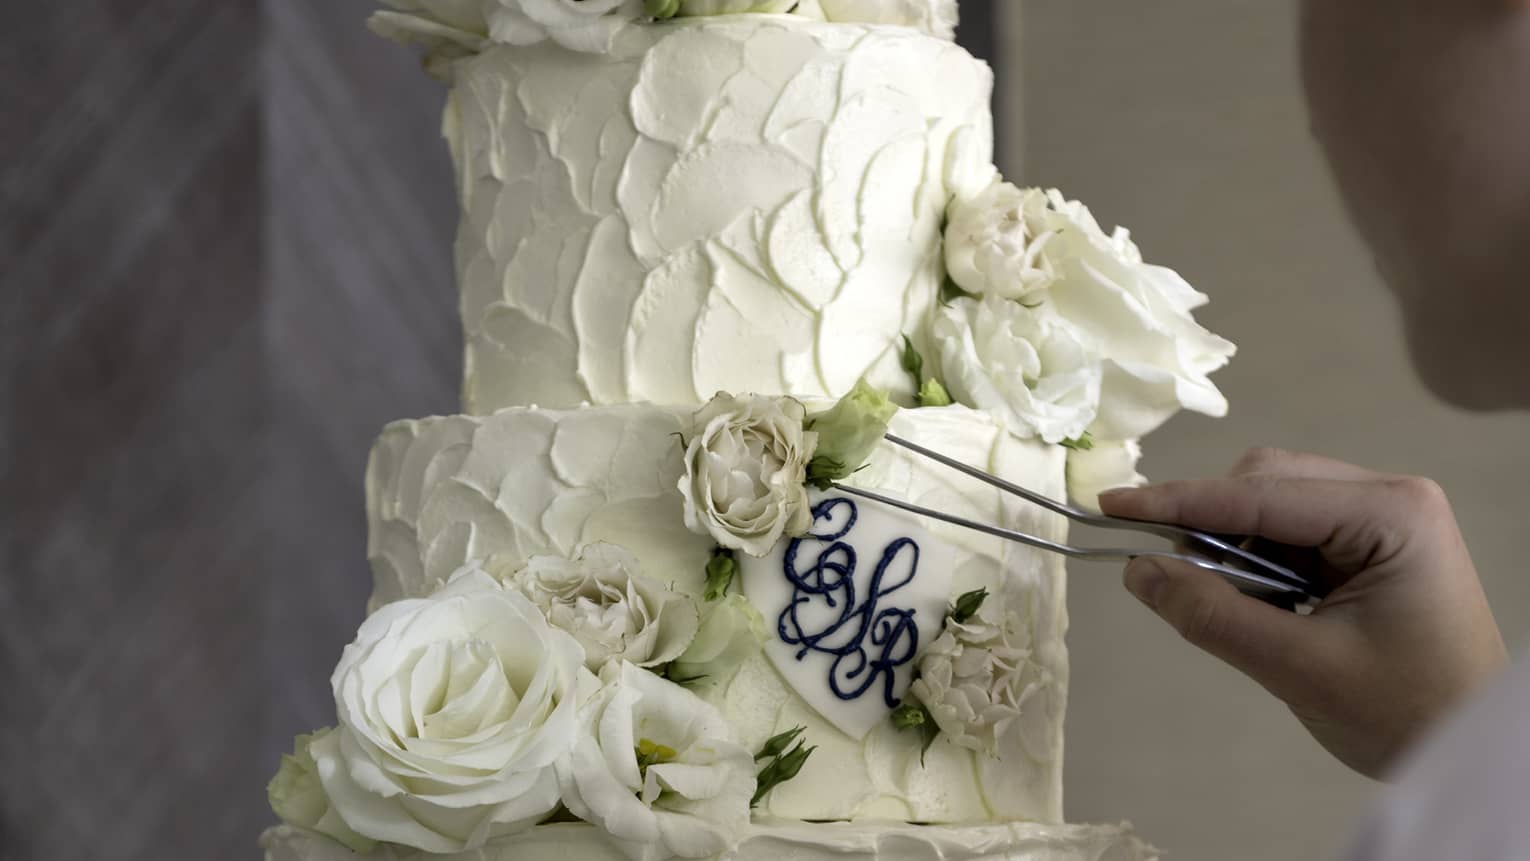 Chef places rose garnish on four tier white wedding cake